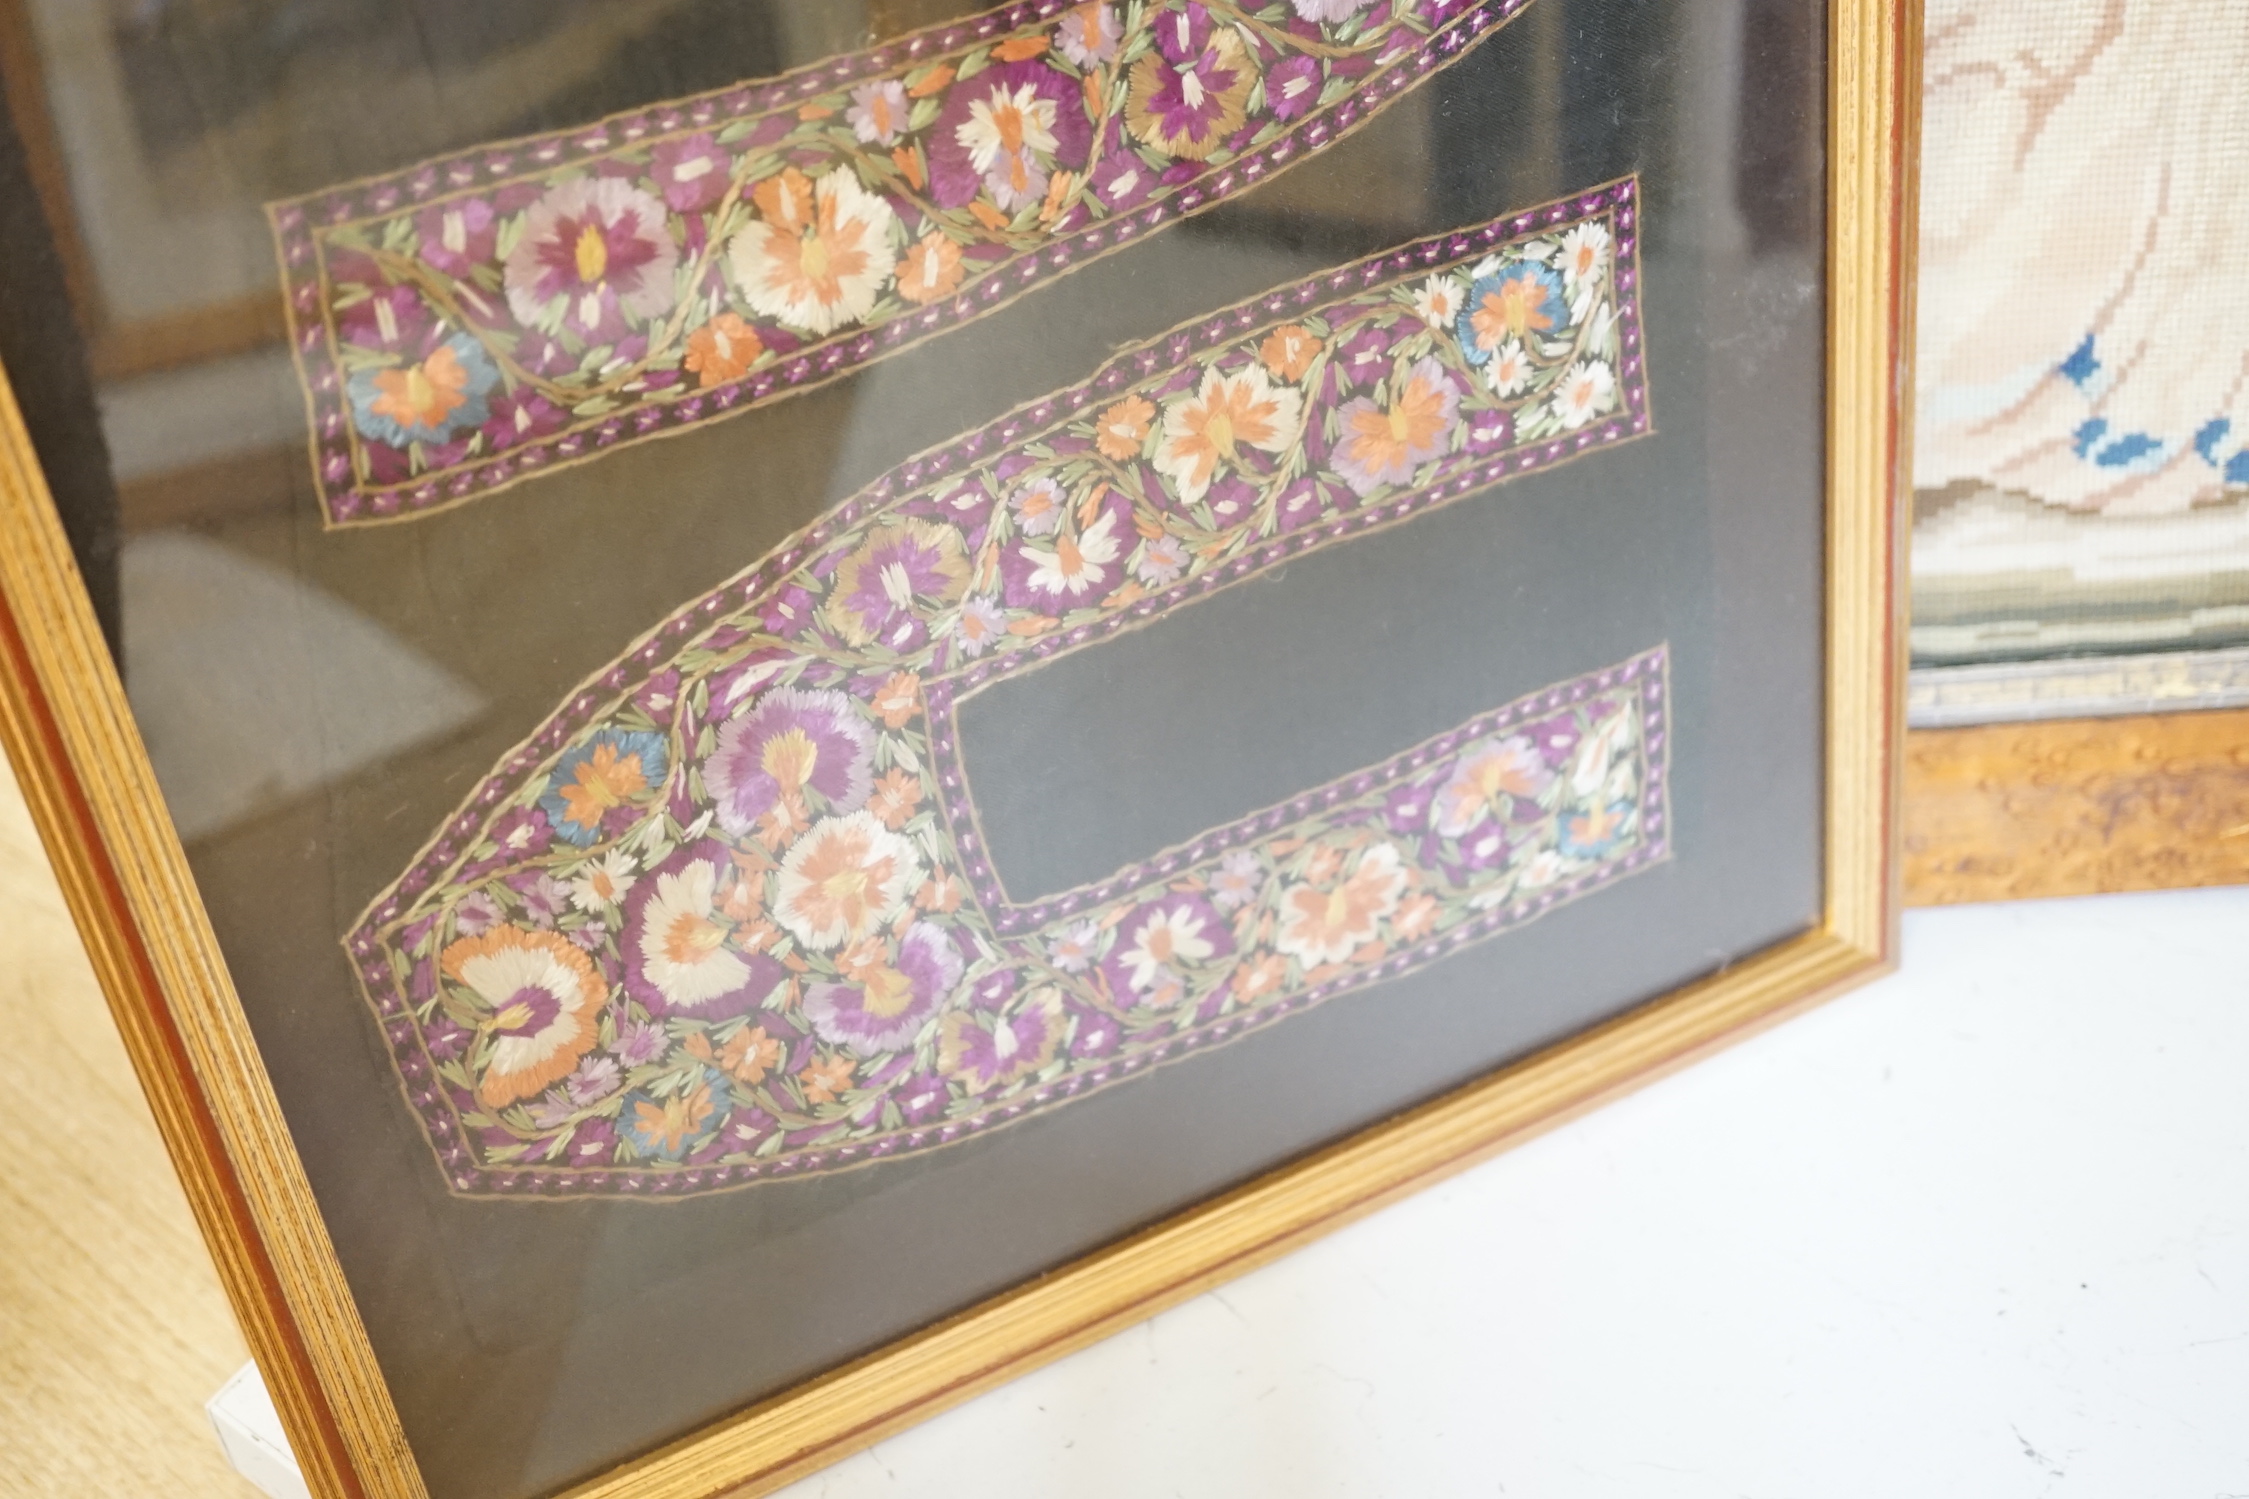 A framed Regency embroidery, two later figurative embroideries and a pair of embroidered slipper fronts, Regency embroidery 37cm wide, 41cm high